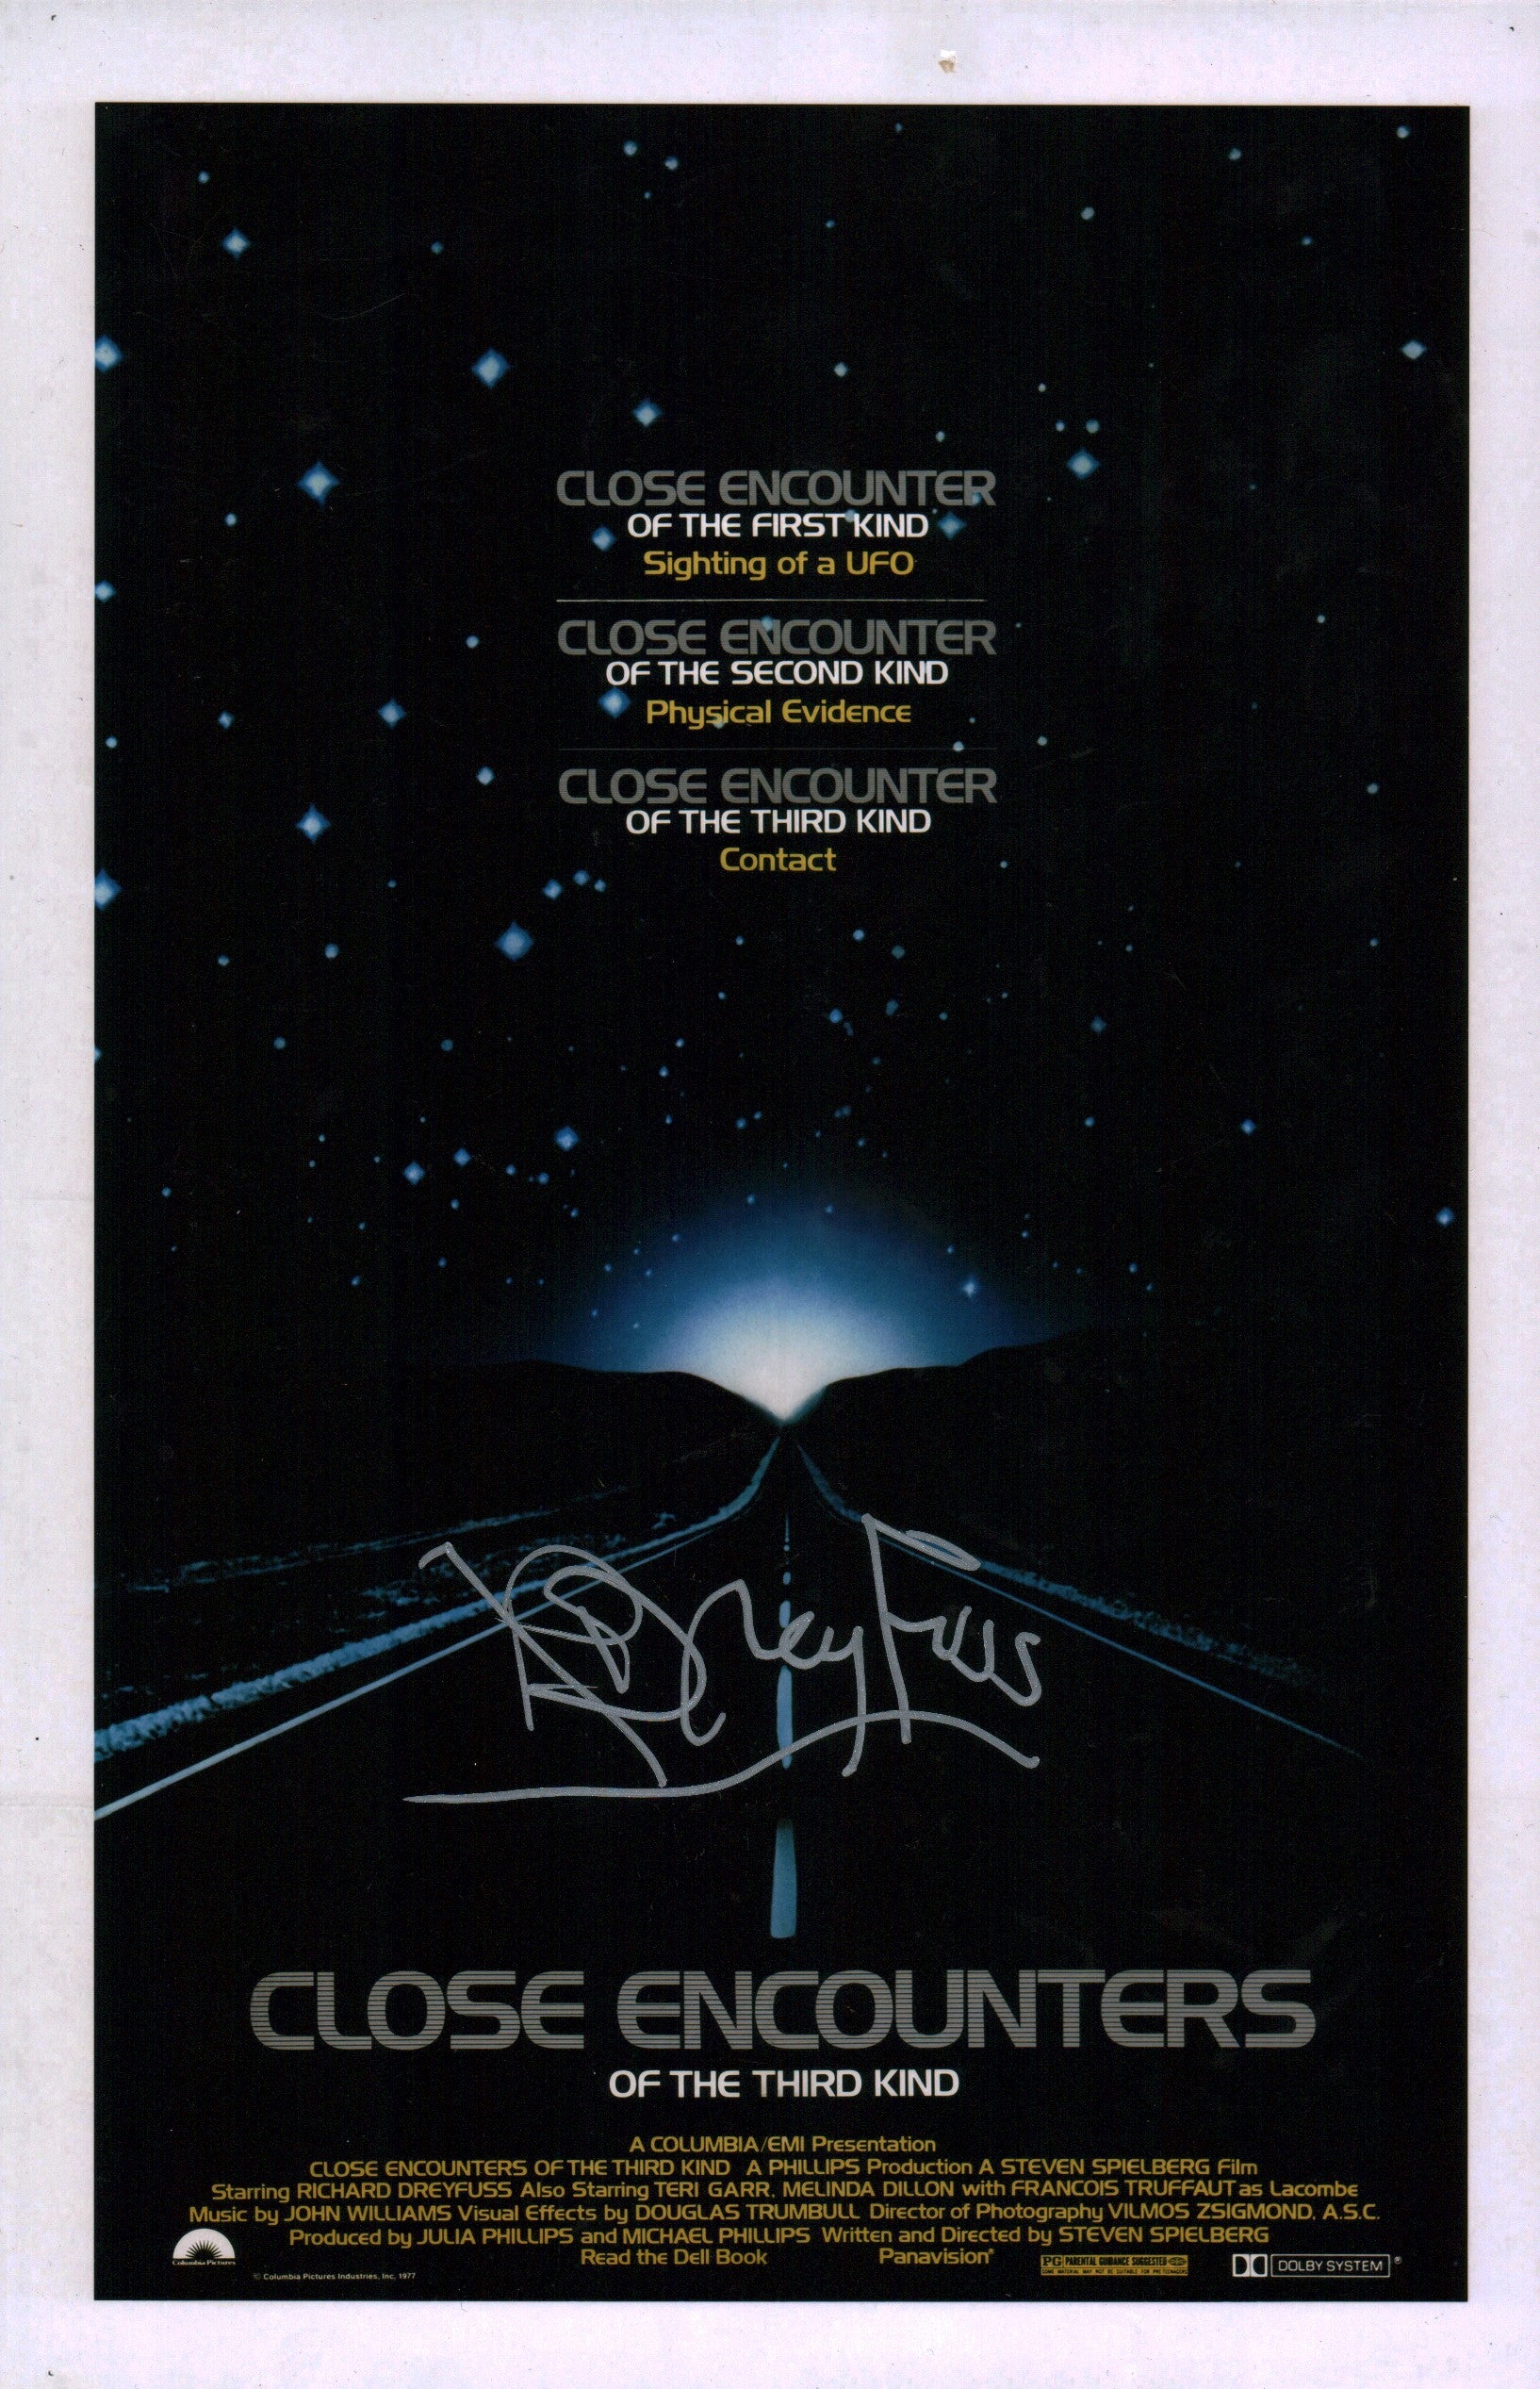 Richard Dreyfuss Close Encounters of the Third Kind 11x17 Signed Photo Poster JSA COA Certified Autograph GalaxyCon